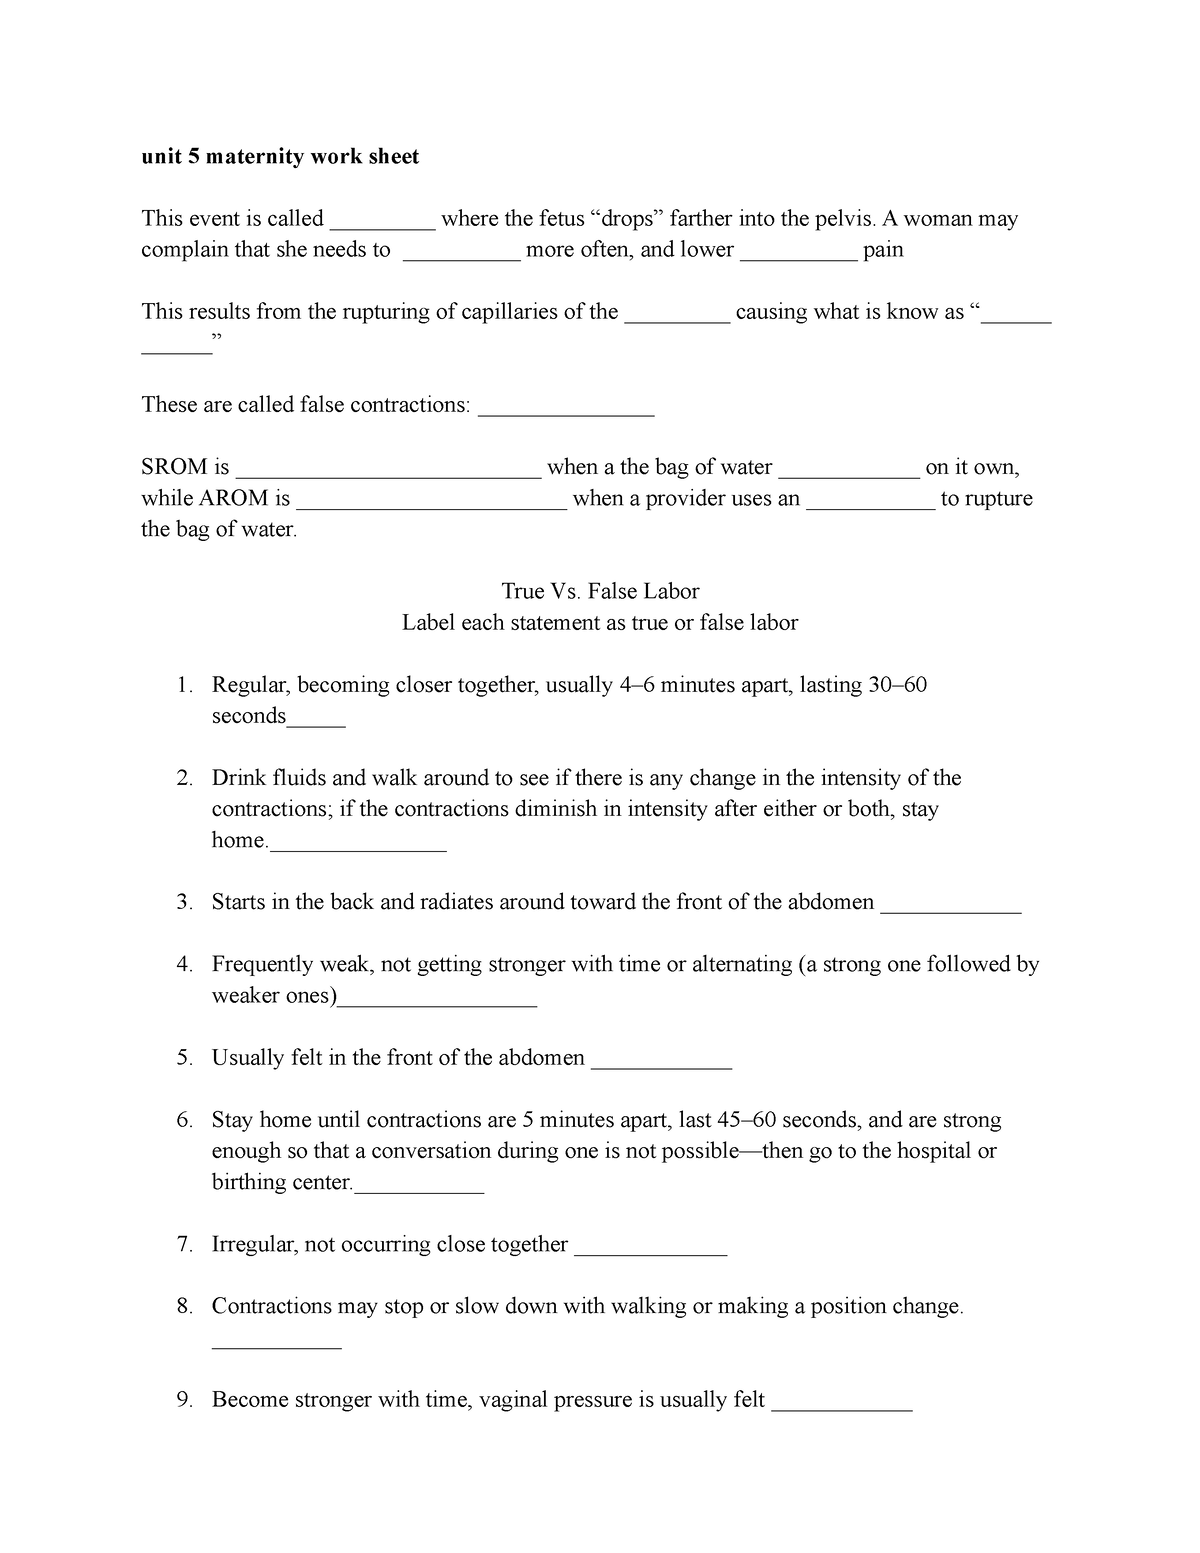 unit-5-worksheet-made-by-professor-for-unit-5-it-is-fill-in-the